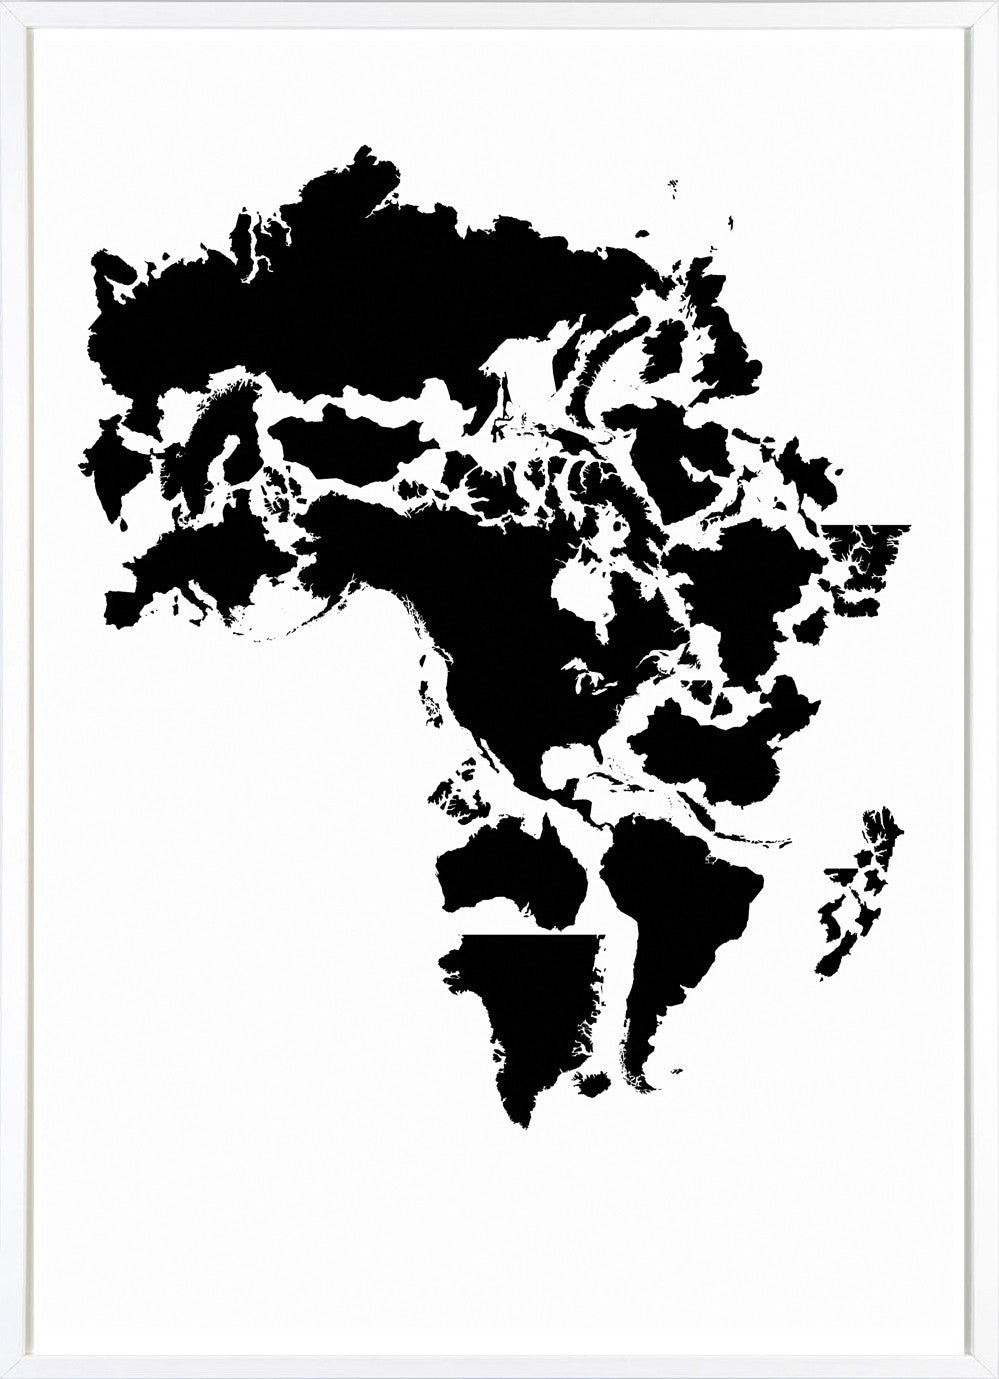 Africa (Black and White)